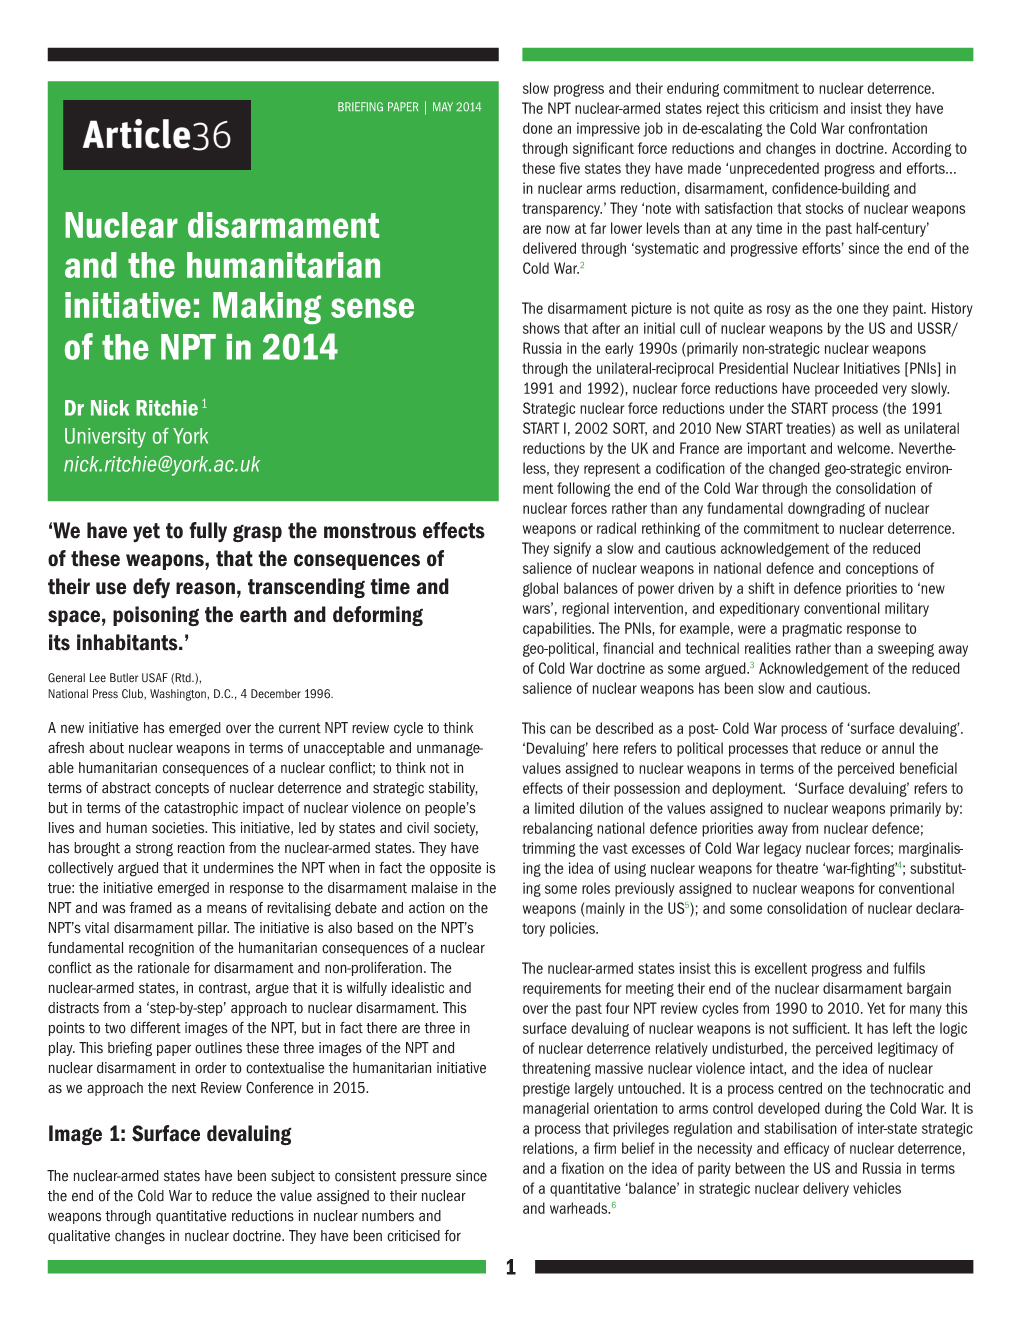 Nuclear Disarmament and the Humanitarian Initiative